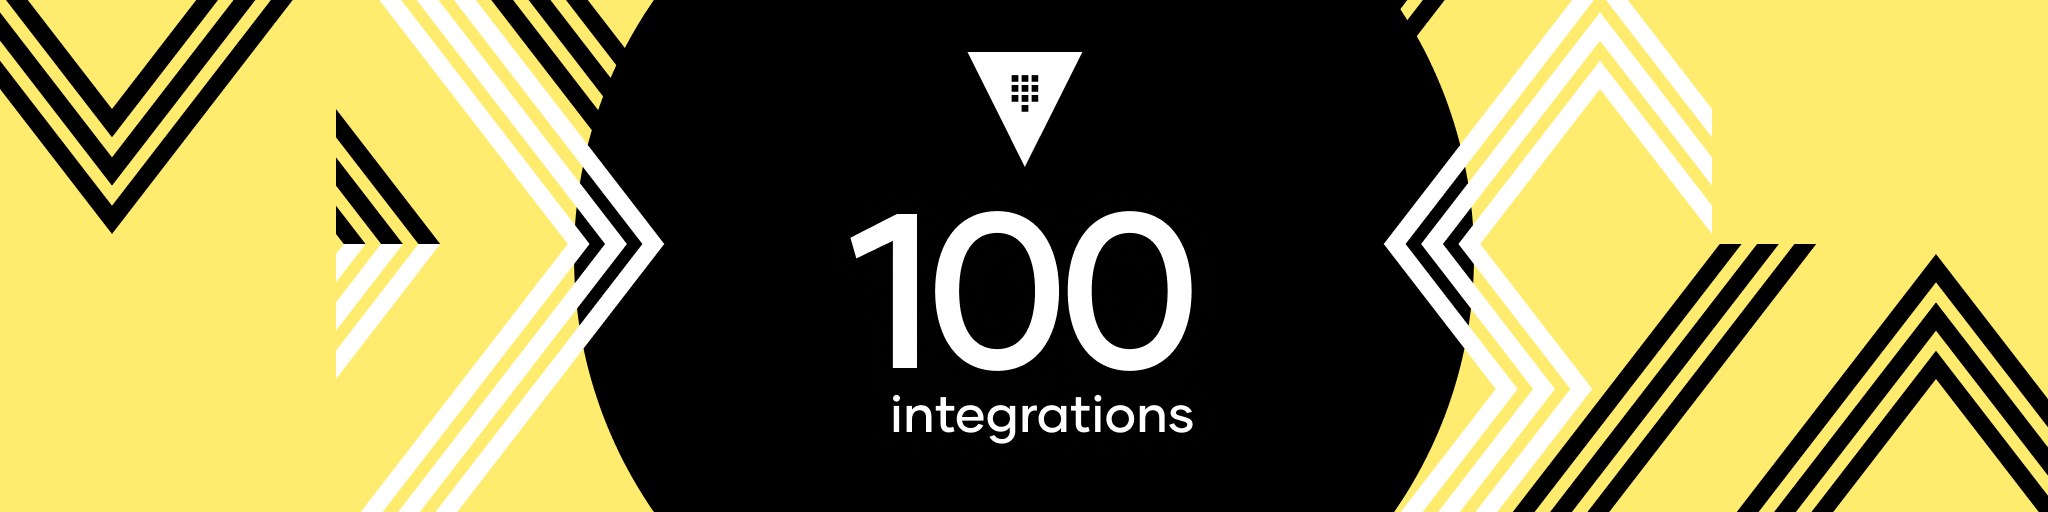 HashiCorp Vault Surpasses 100 Integrations with 75 Partners